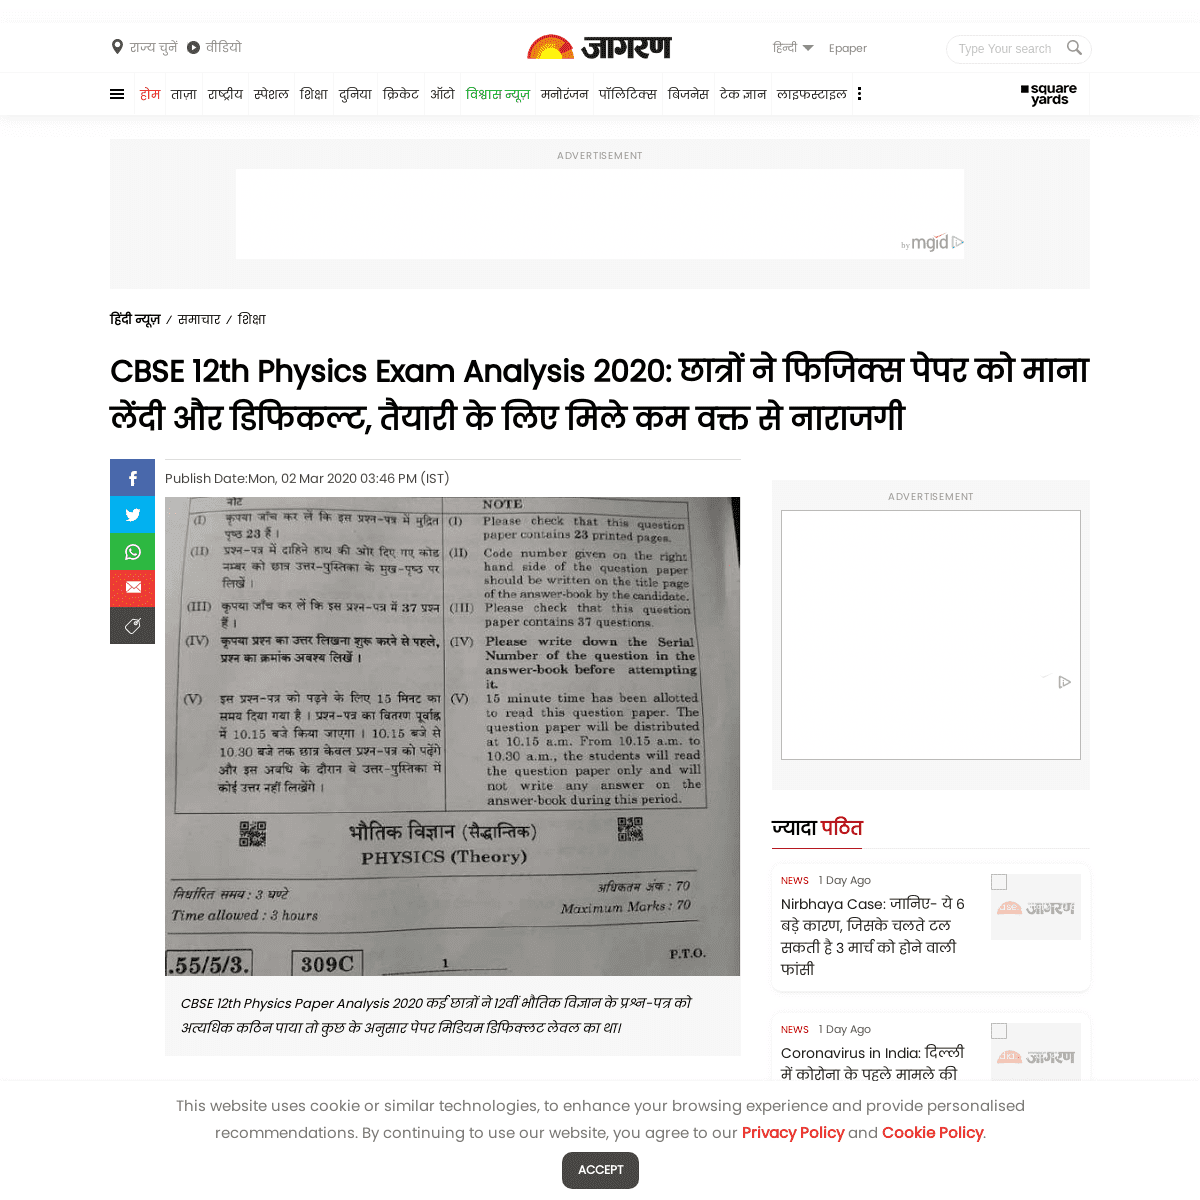 A complete backup of www.jagran.com/news/education-cbse-12th-physics-paper-analysis-2020-mix-response-from-students-find-paper-v